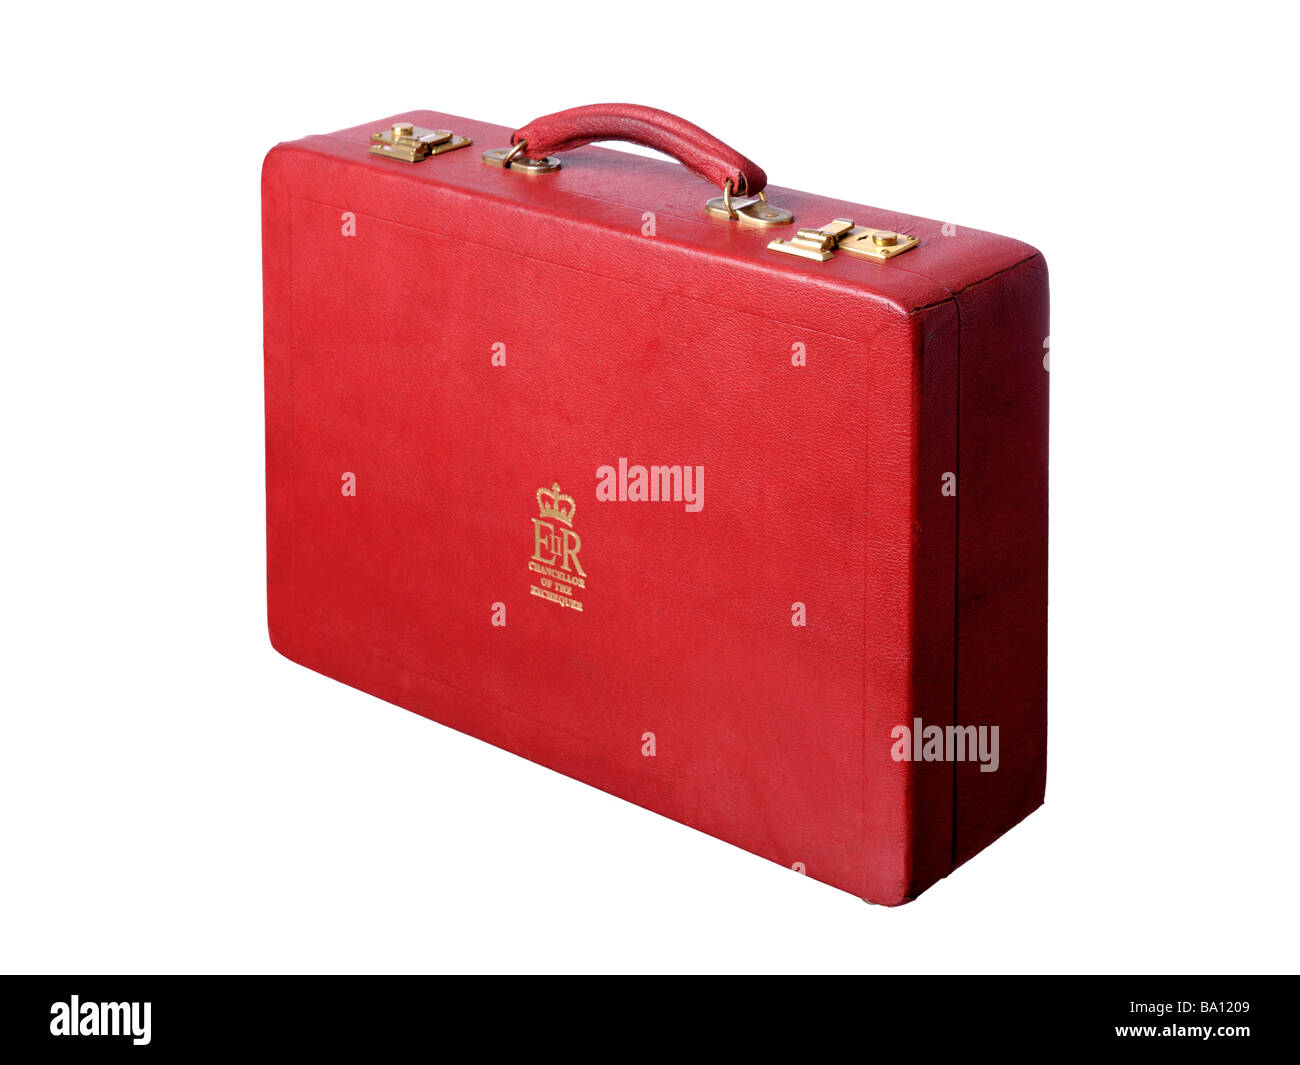 British Red Budget briefcase EIIR emblem Chancellor of the Exchequer Stock Photo